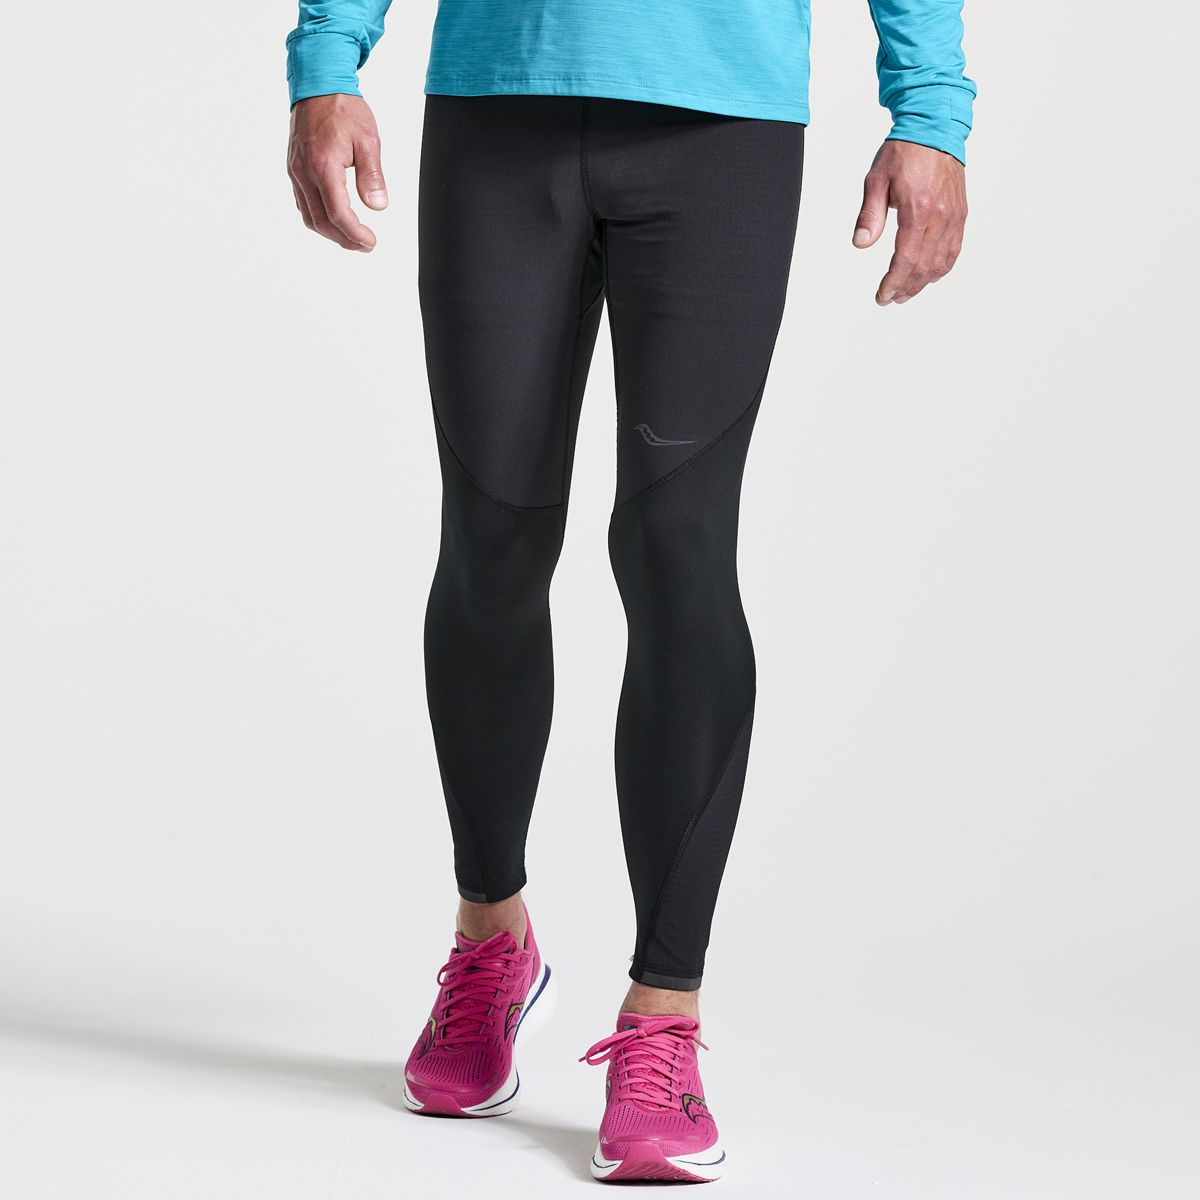 Men's Boulder Wind Tight - View All